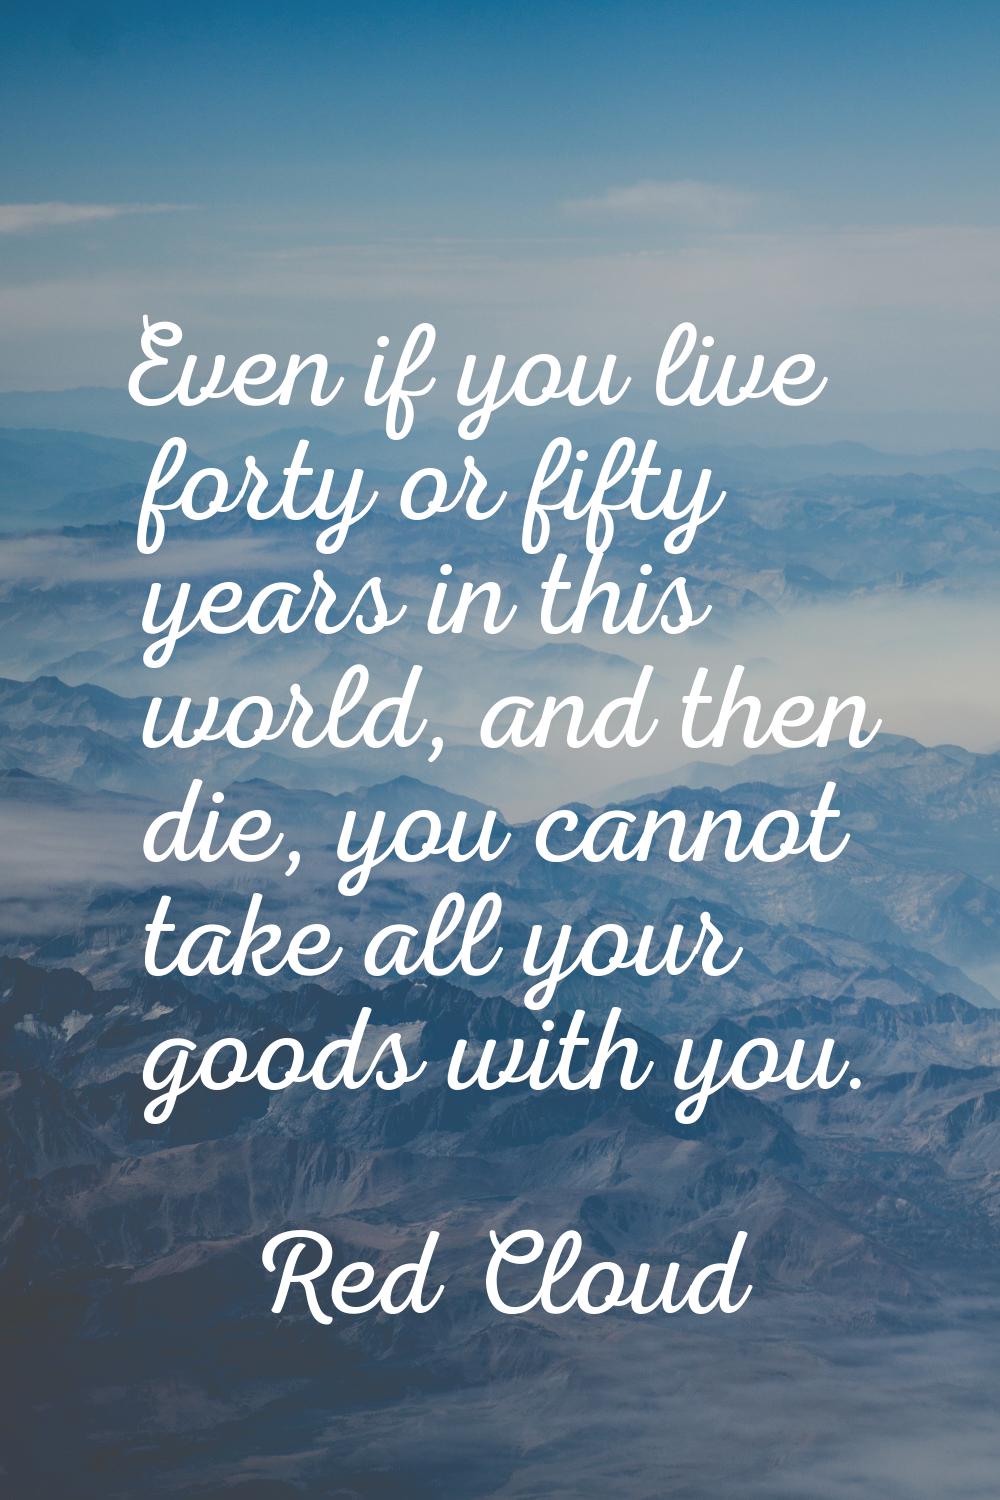 Even if you live forty or fifty years in this world, and then die, you cannot take all your goods w